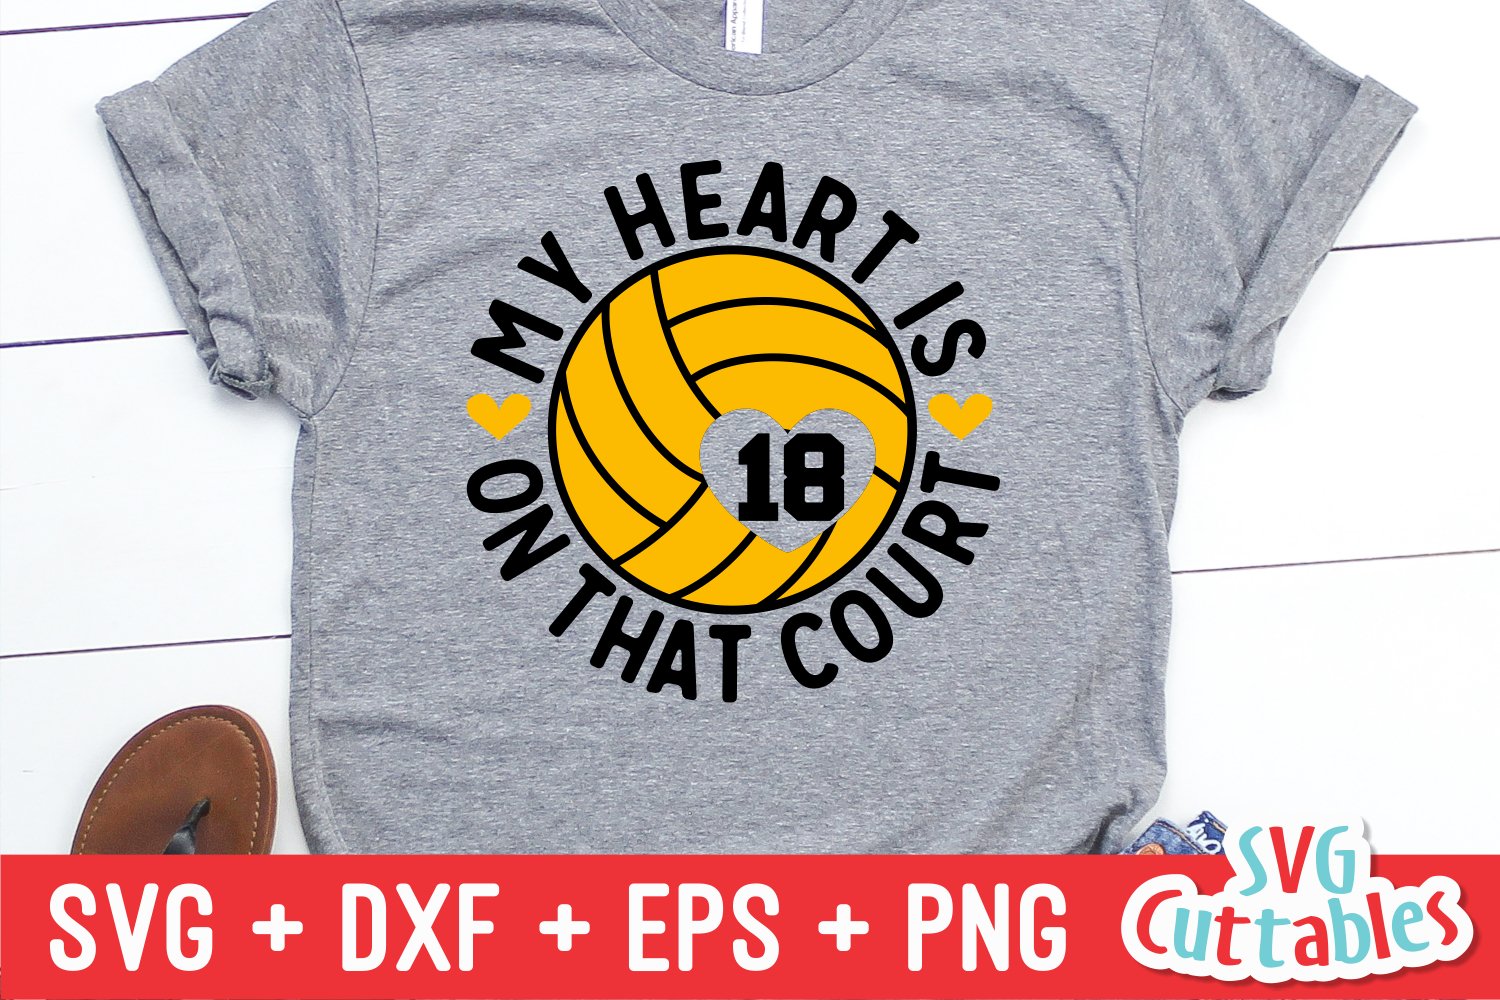 My heart is on that court - t-shirt design.